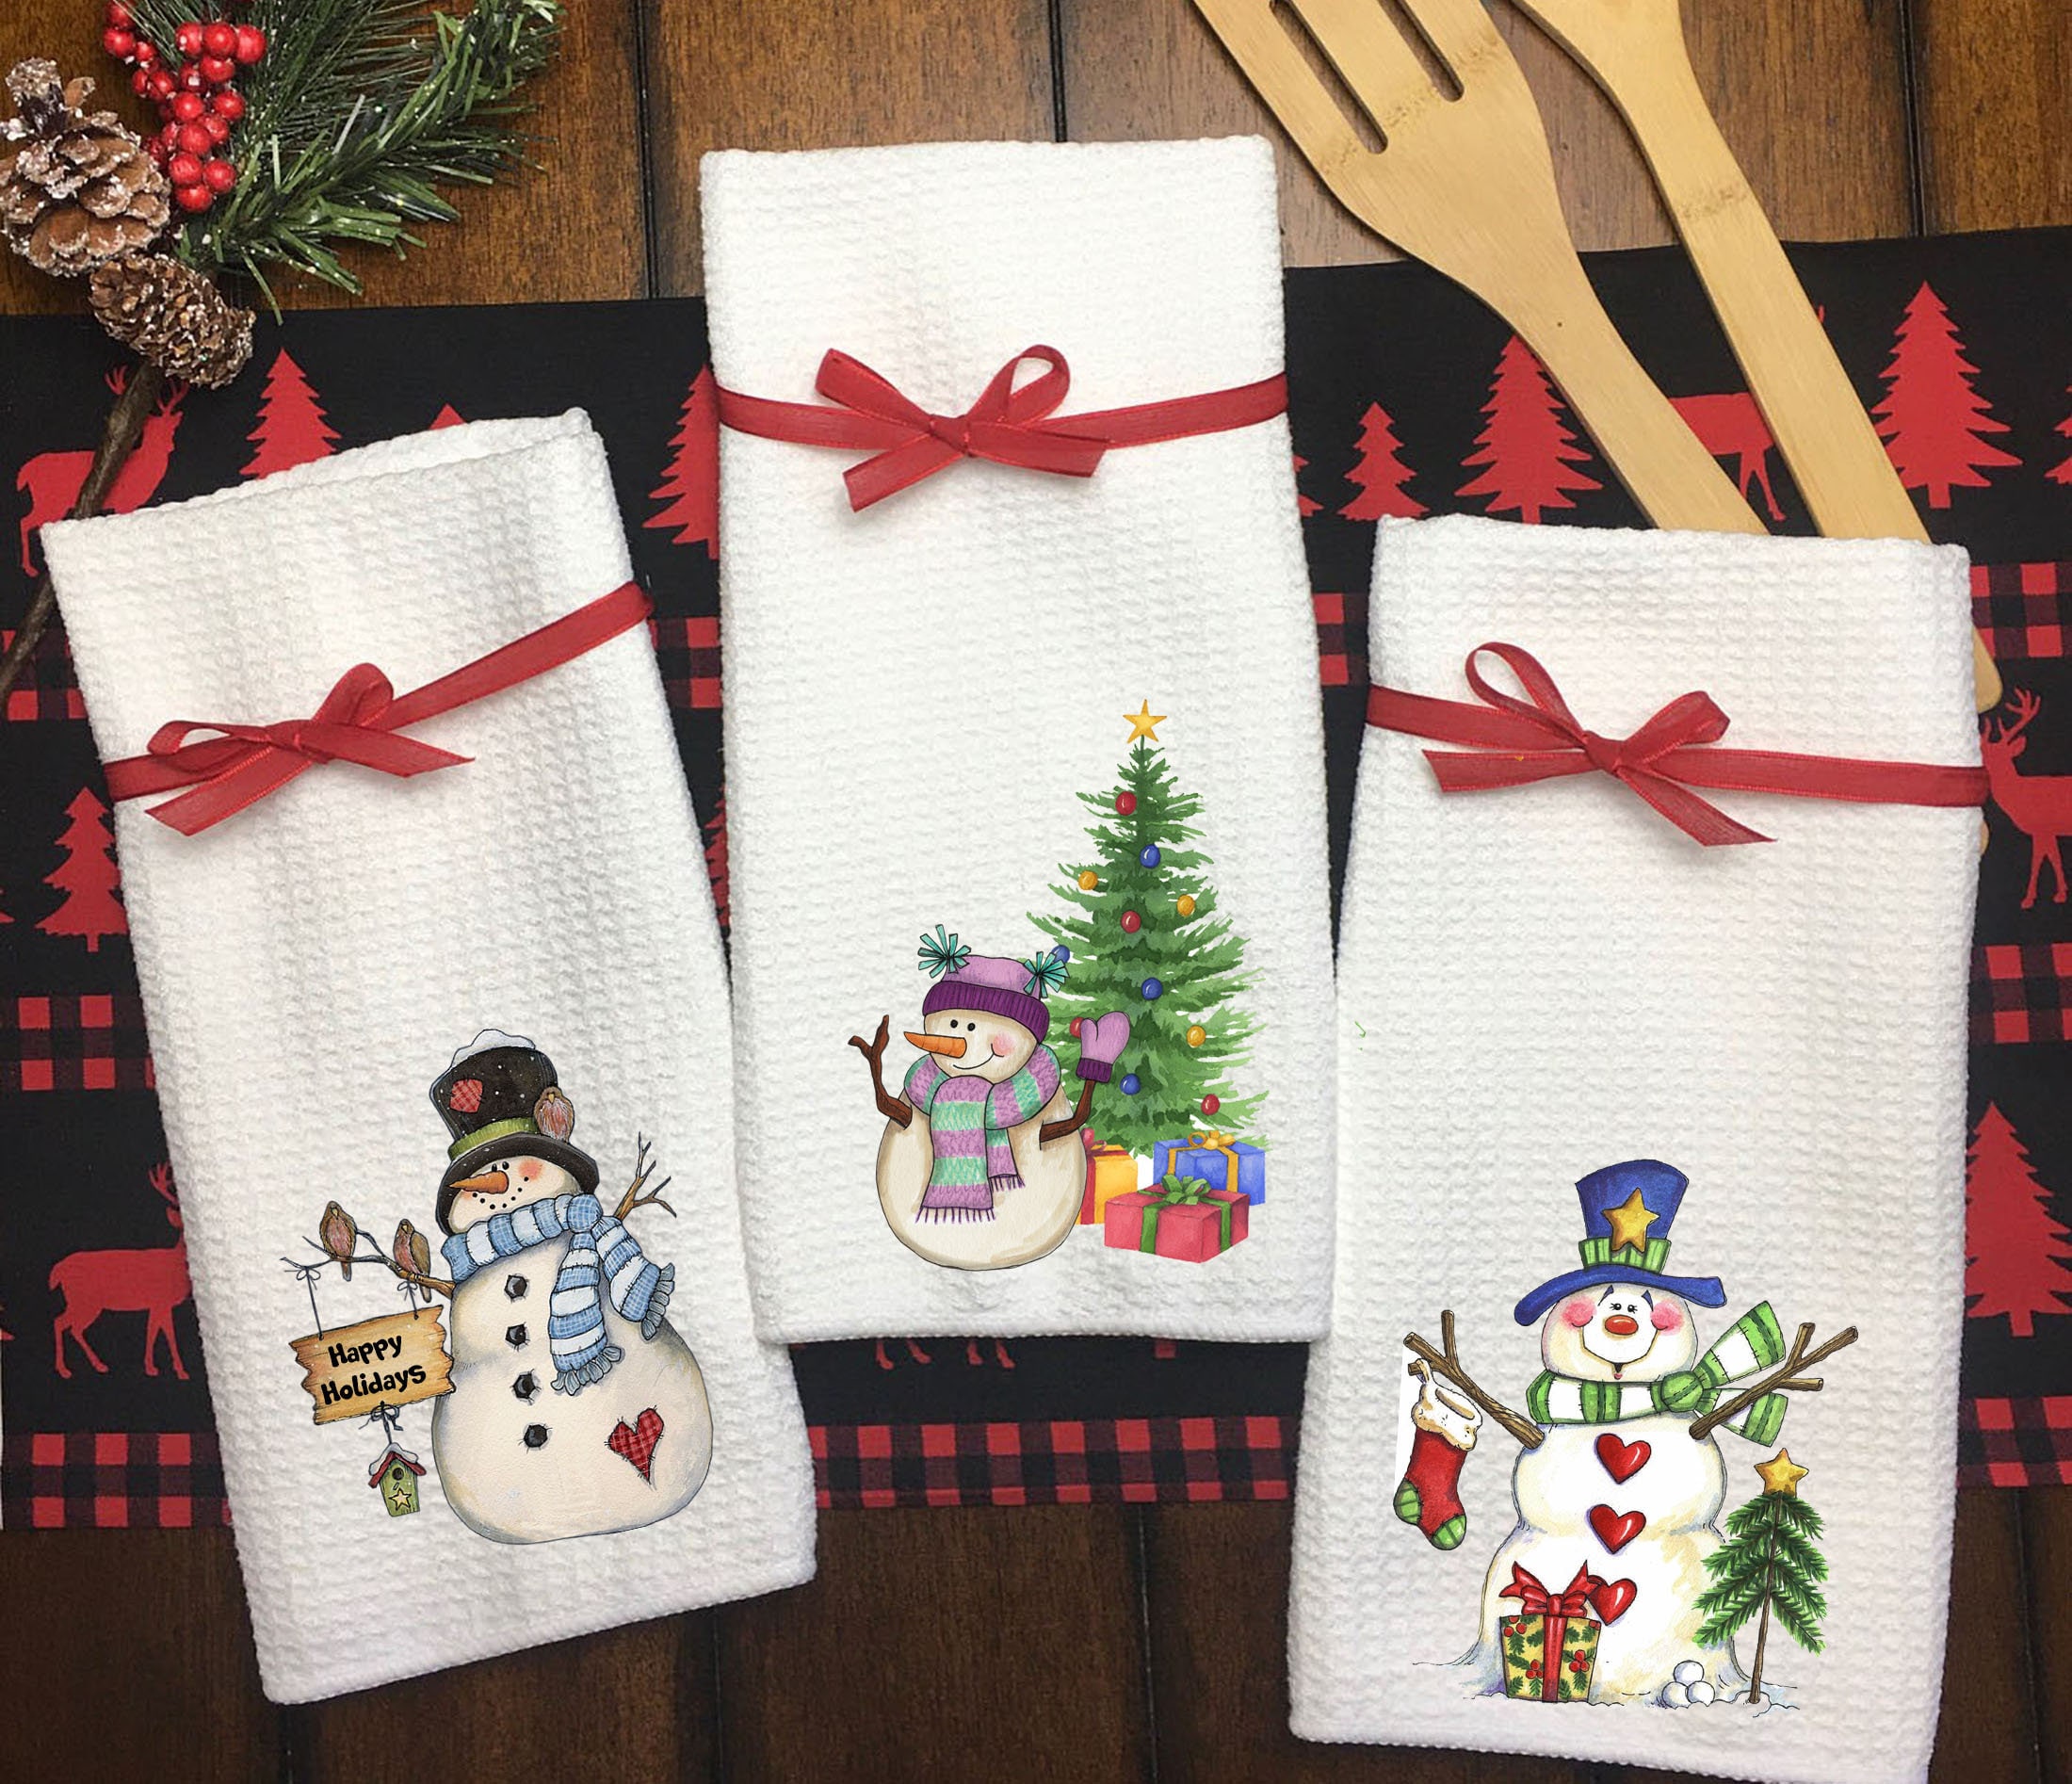 Home Alone Kitchen Towels, 2 Pack Funny Christmas Dish Towels, Home Alone  Merchandise Gifts, Holiday Kitchen Bathroom Decor, Xmas Hand Towels, White